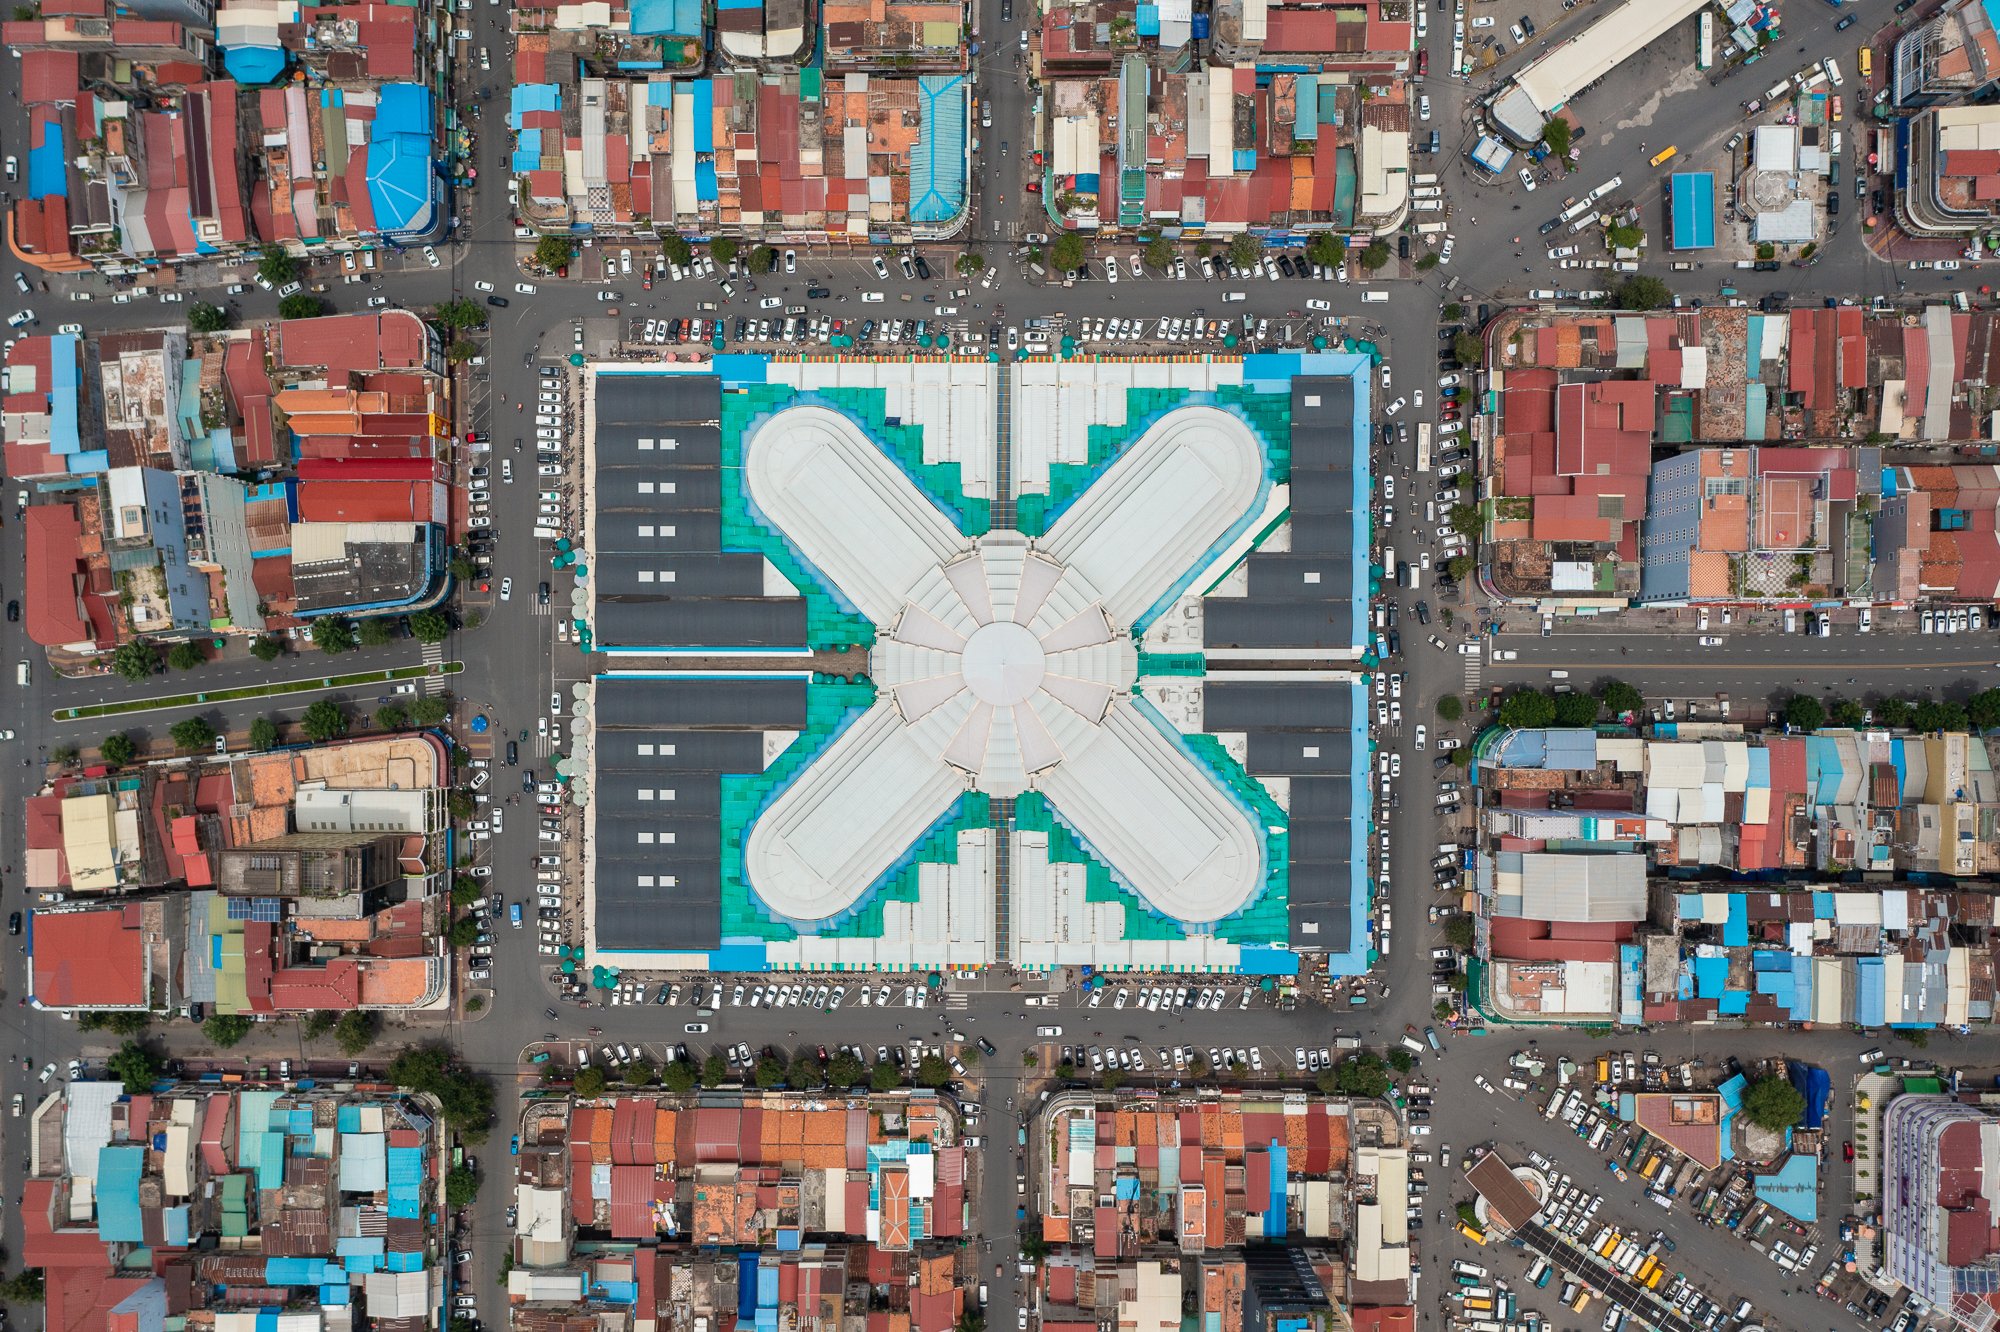 Bird's eye view of Central Market in Phnom Penh, Cambodia. Taken while working as a drone operator for CNN